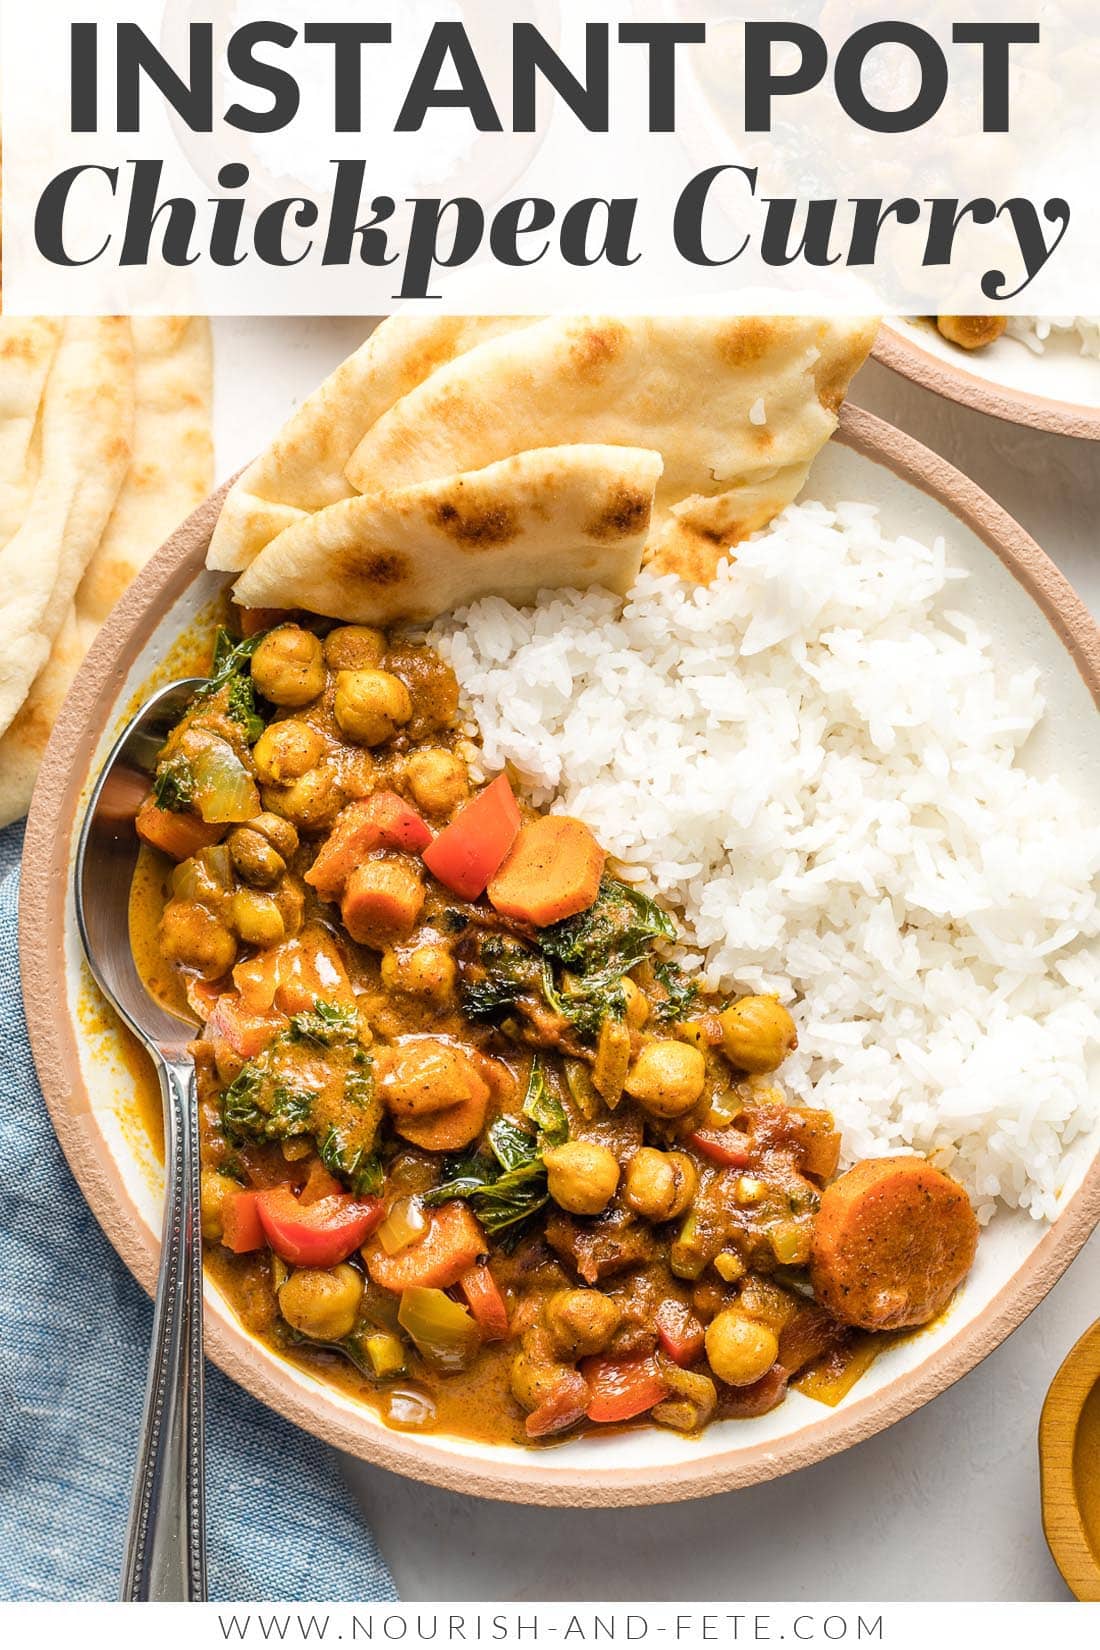 Instant Pot Chickpea Curry (Chana Masala) - Nourish and Fete